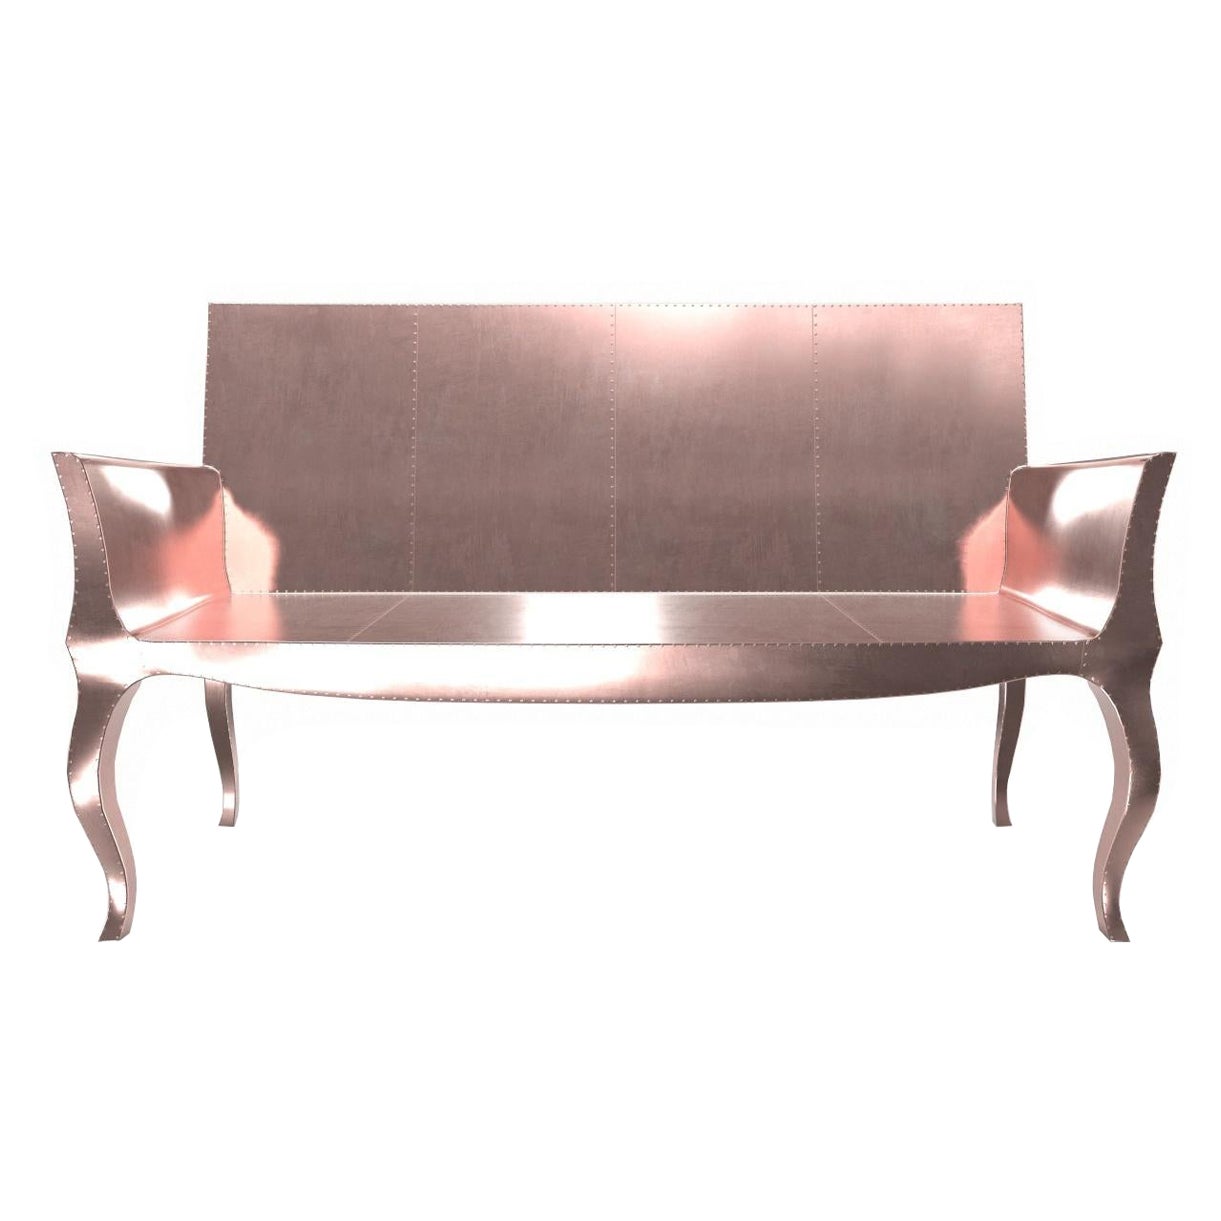 Louise Settee Art Deco Loveseats in Smooth Copper by Paul Mathieu For S Odegard 